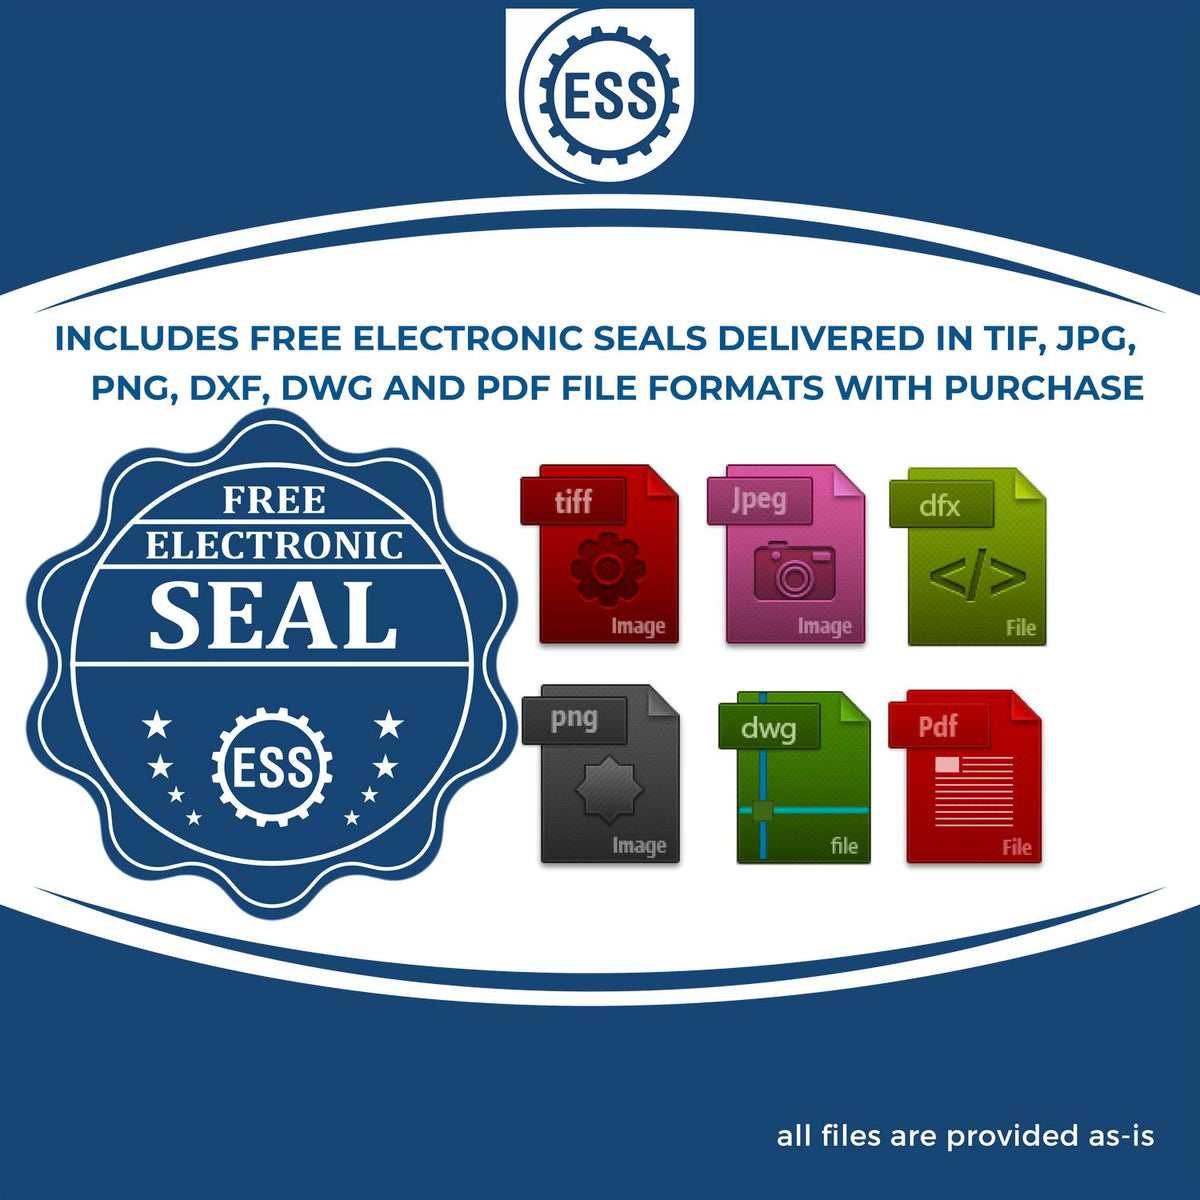 An infographic for the free electronic seal for the Heavy Duty Cast Iron Connecticut Geologist Seal Embosser illustrating the different file type icons such as DXF, DWG, TIF, JPG and PNG.